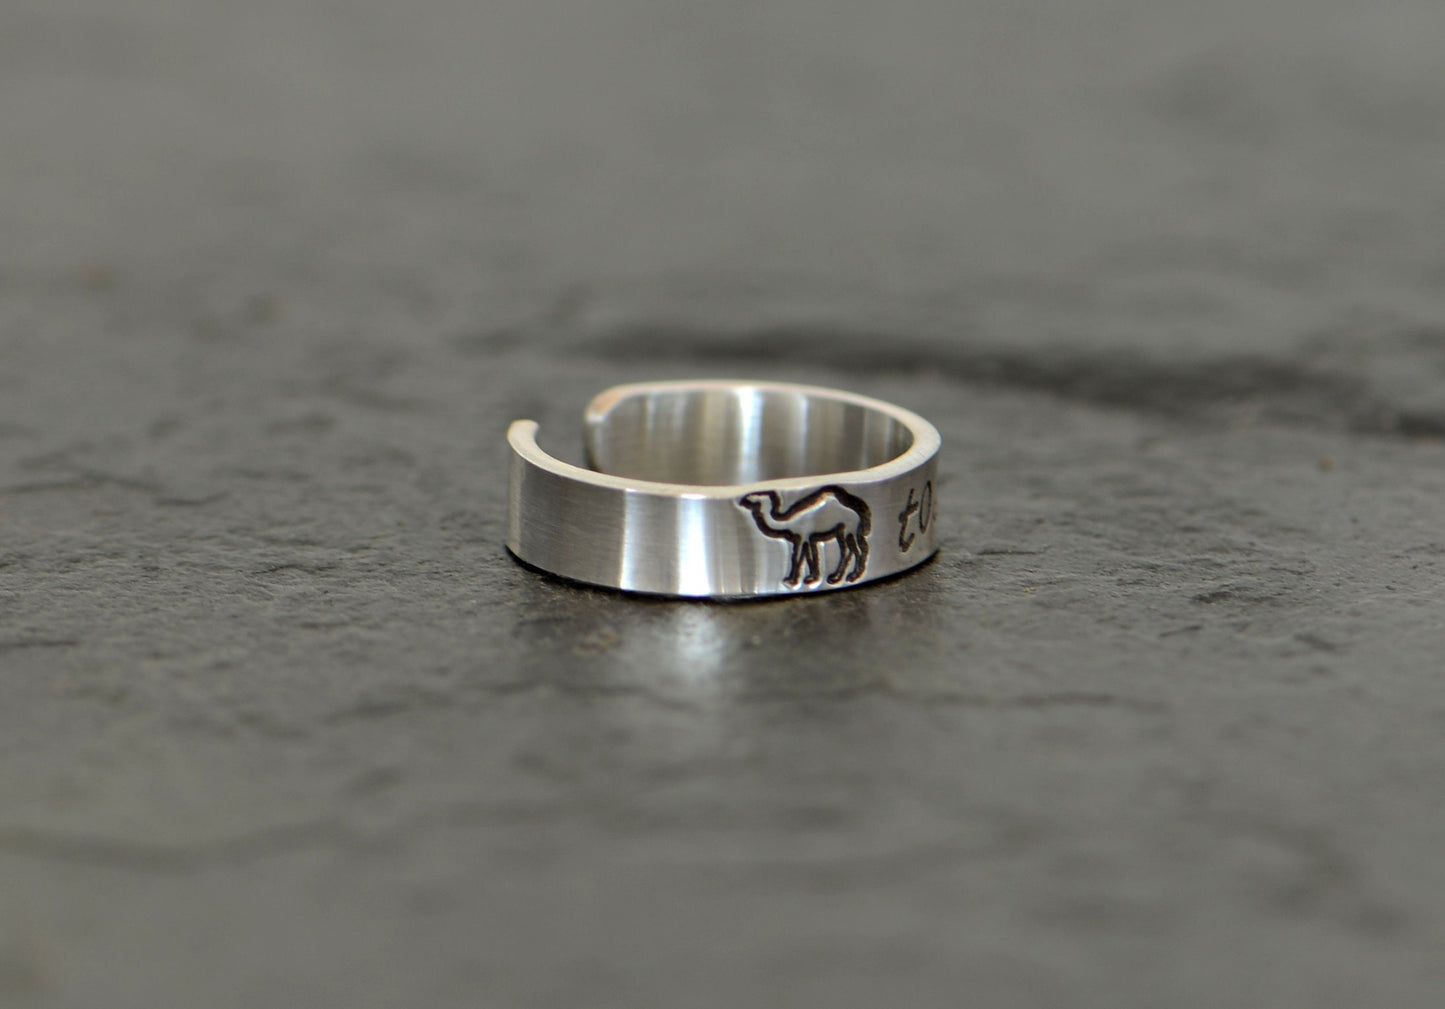 Camel toe sterling silver toe ring